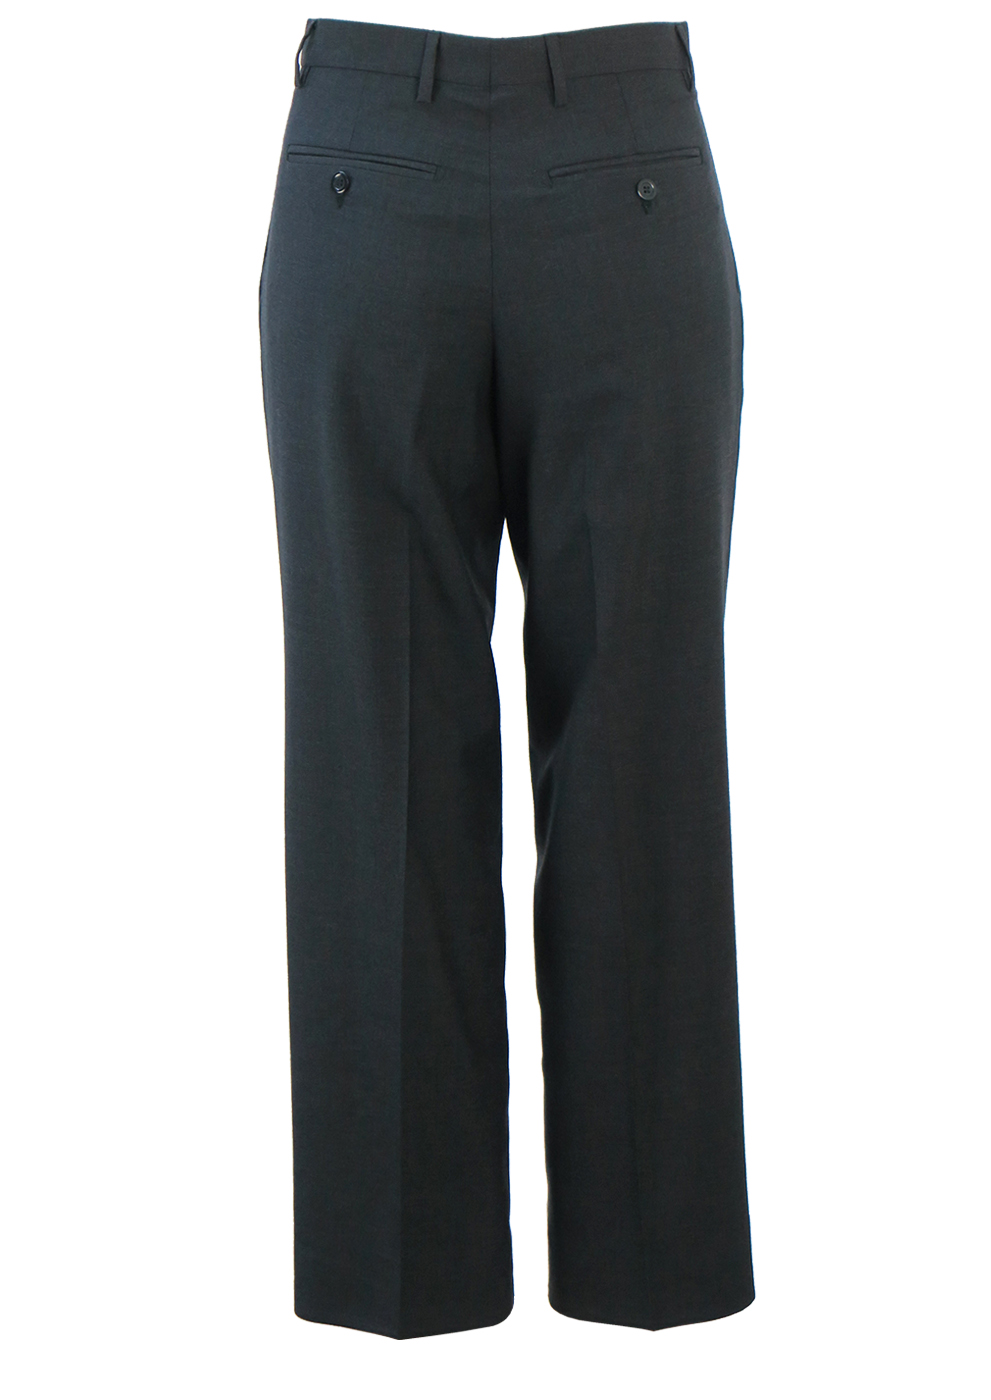 Charcoal Grey Tailored Wool Trousers - S/M | Reign Vintage